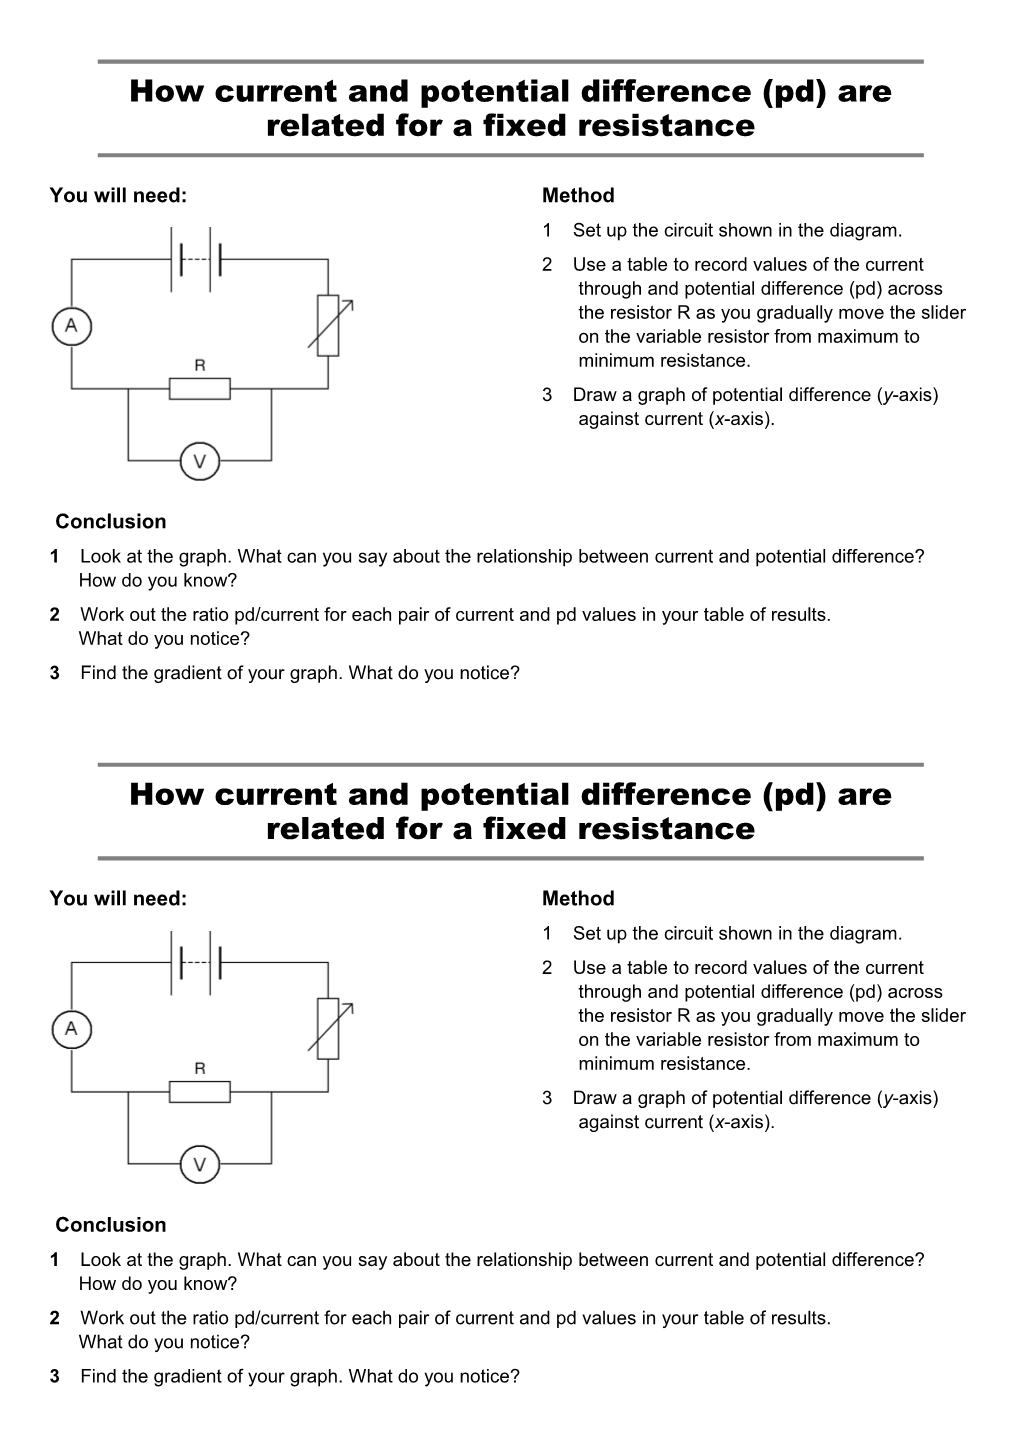 How Current and Potential Difference (Pd) Are Related for a Fixed Resistance